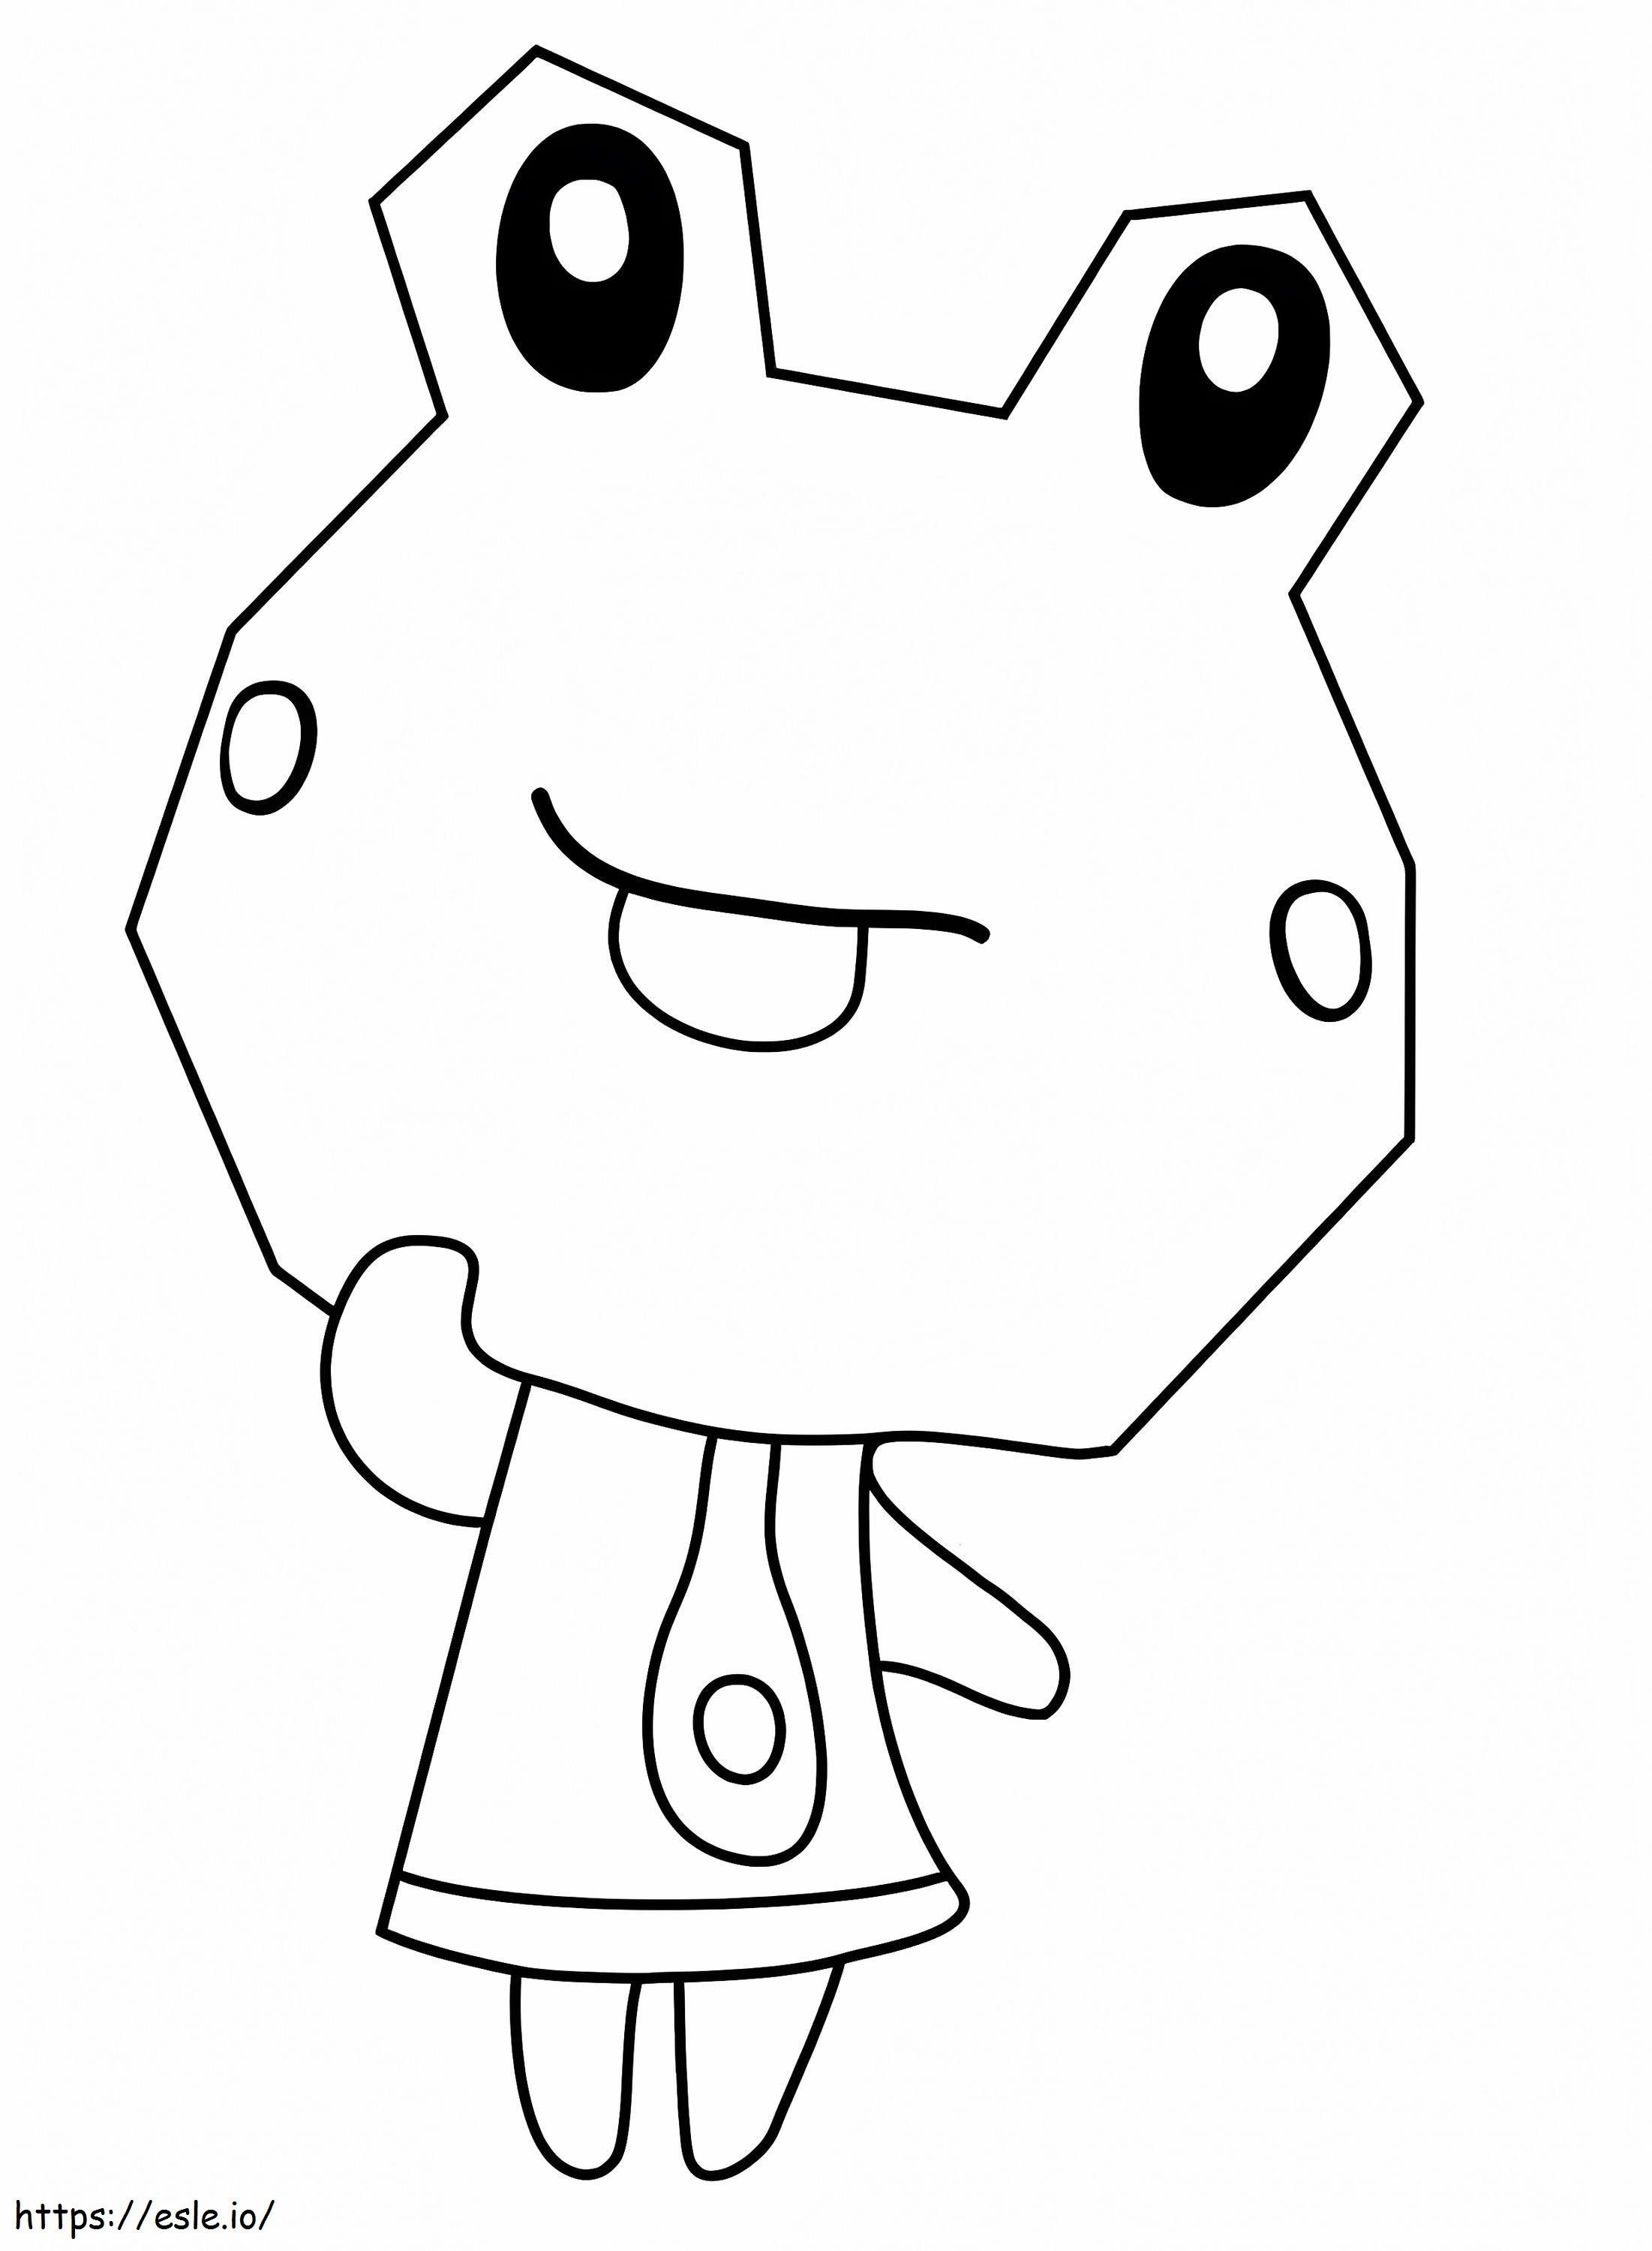 Sunny From Animal Crossing coloring page